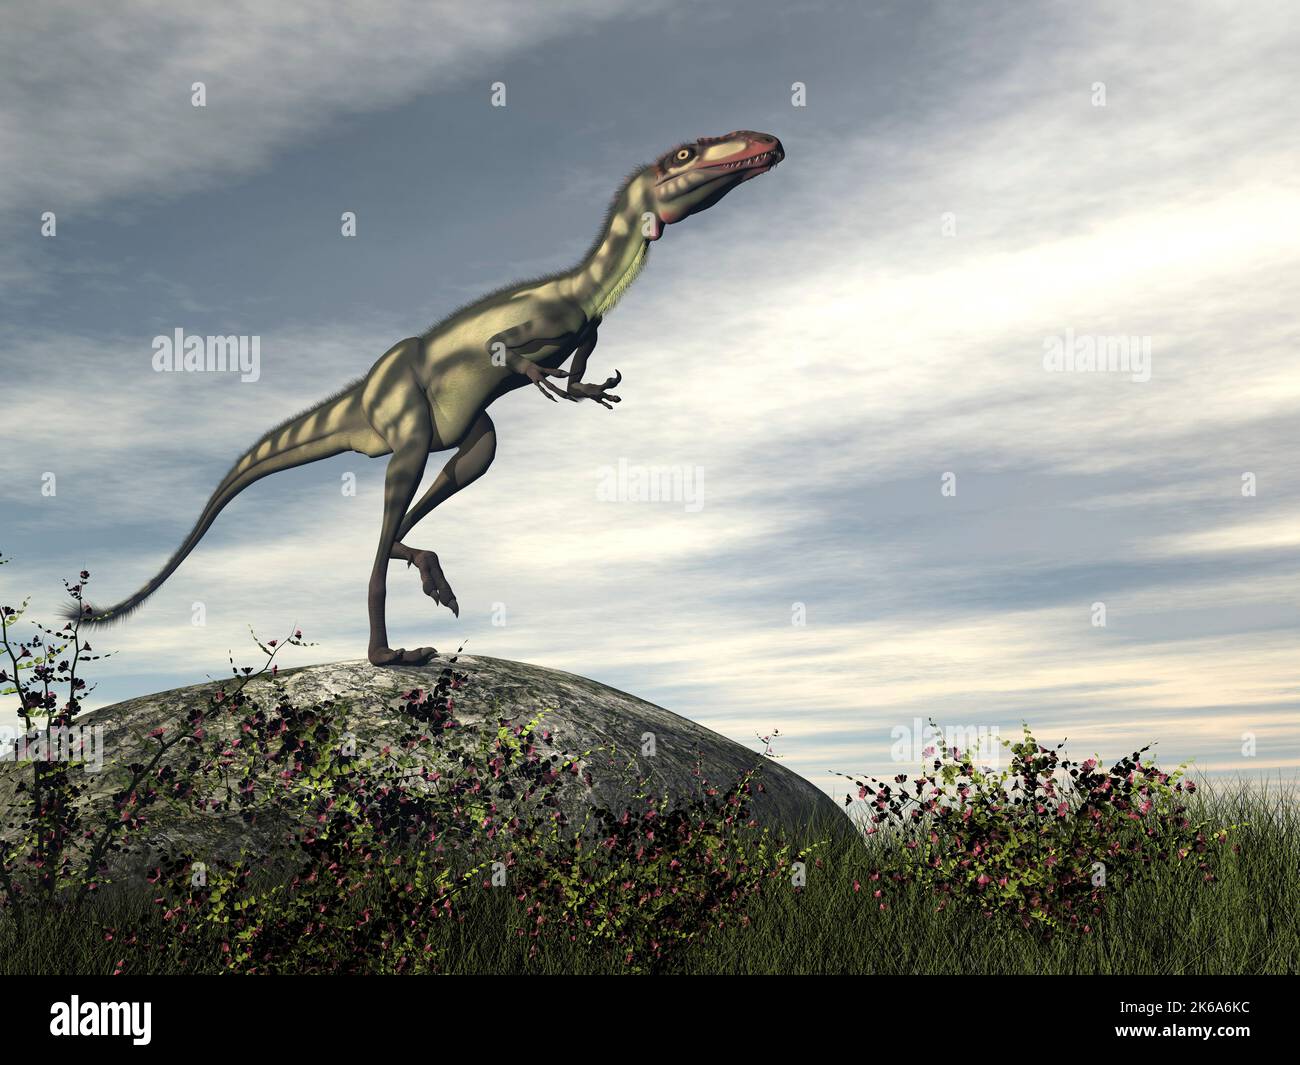 Dilong dinosaur standing on a rock by day. Stock Photo